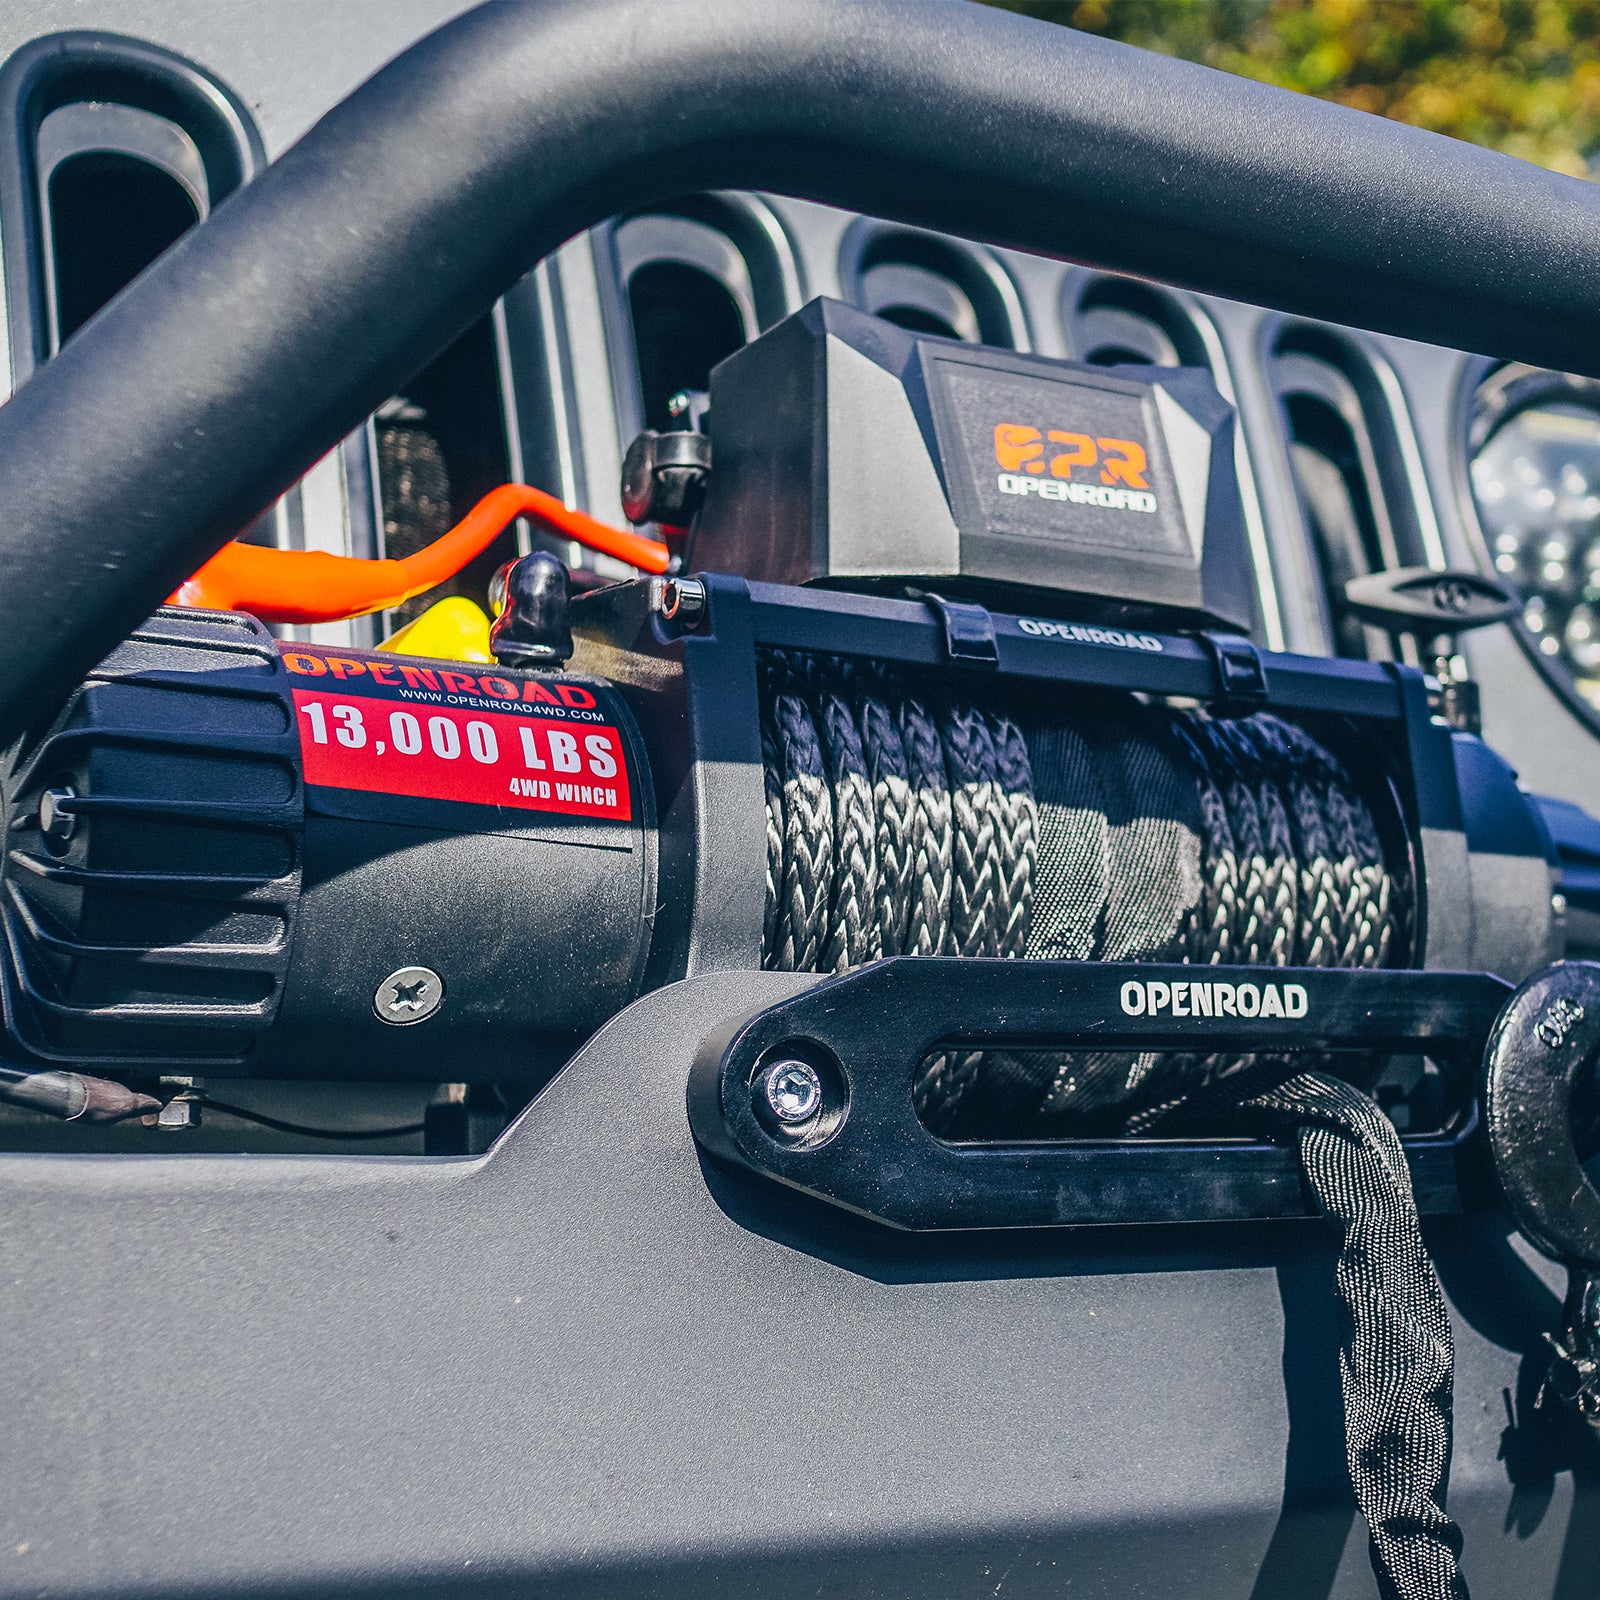 OPENROAD 13,000lbs Winch with Synthetic Rope and 2 Wireless Remotes -Panther Series 2S Plus winch OPENROAD   